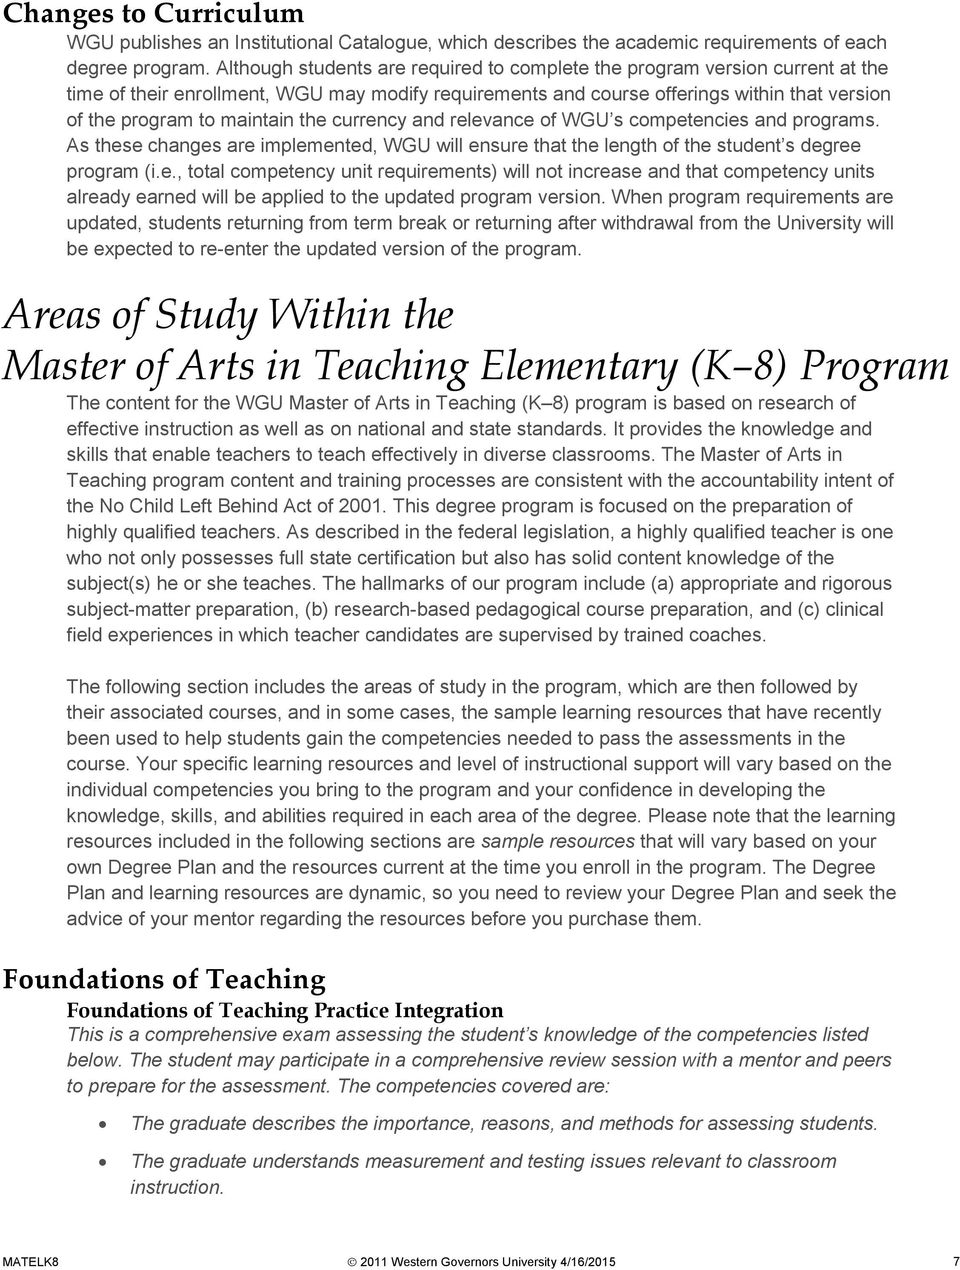 the currency and relevance of WGU s competencies and programs. As these changes are implemented, WGU will ensure that the length of the student s degree program (i.e., total competency unit requirements) will not increase and that competency units already earned will be applied to the updated program version.